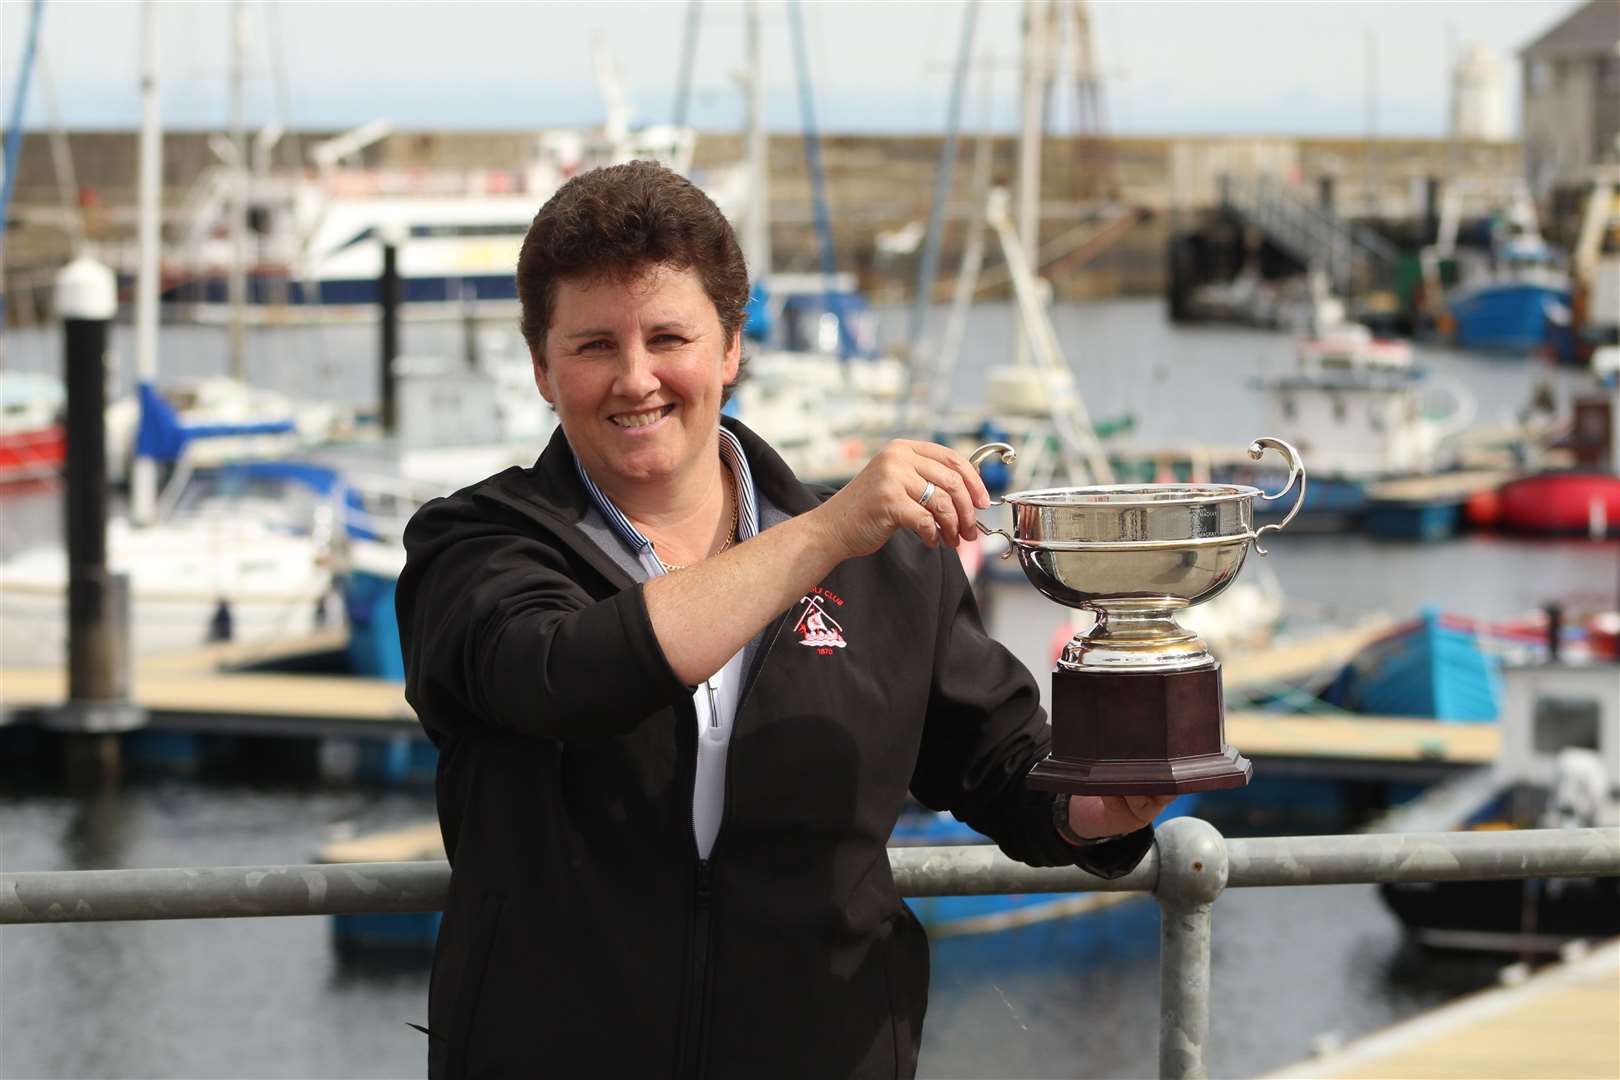 Deirdre Macangus shows her club championship trophy in Wick this week. Picture: Alan Hendry